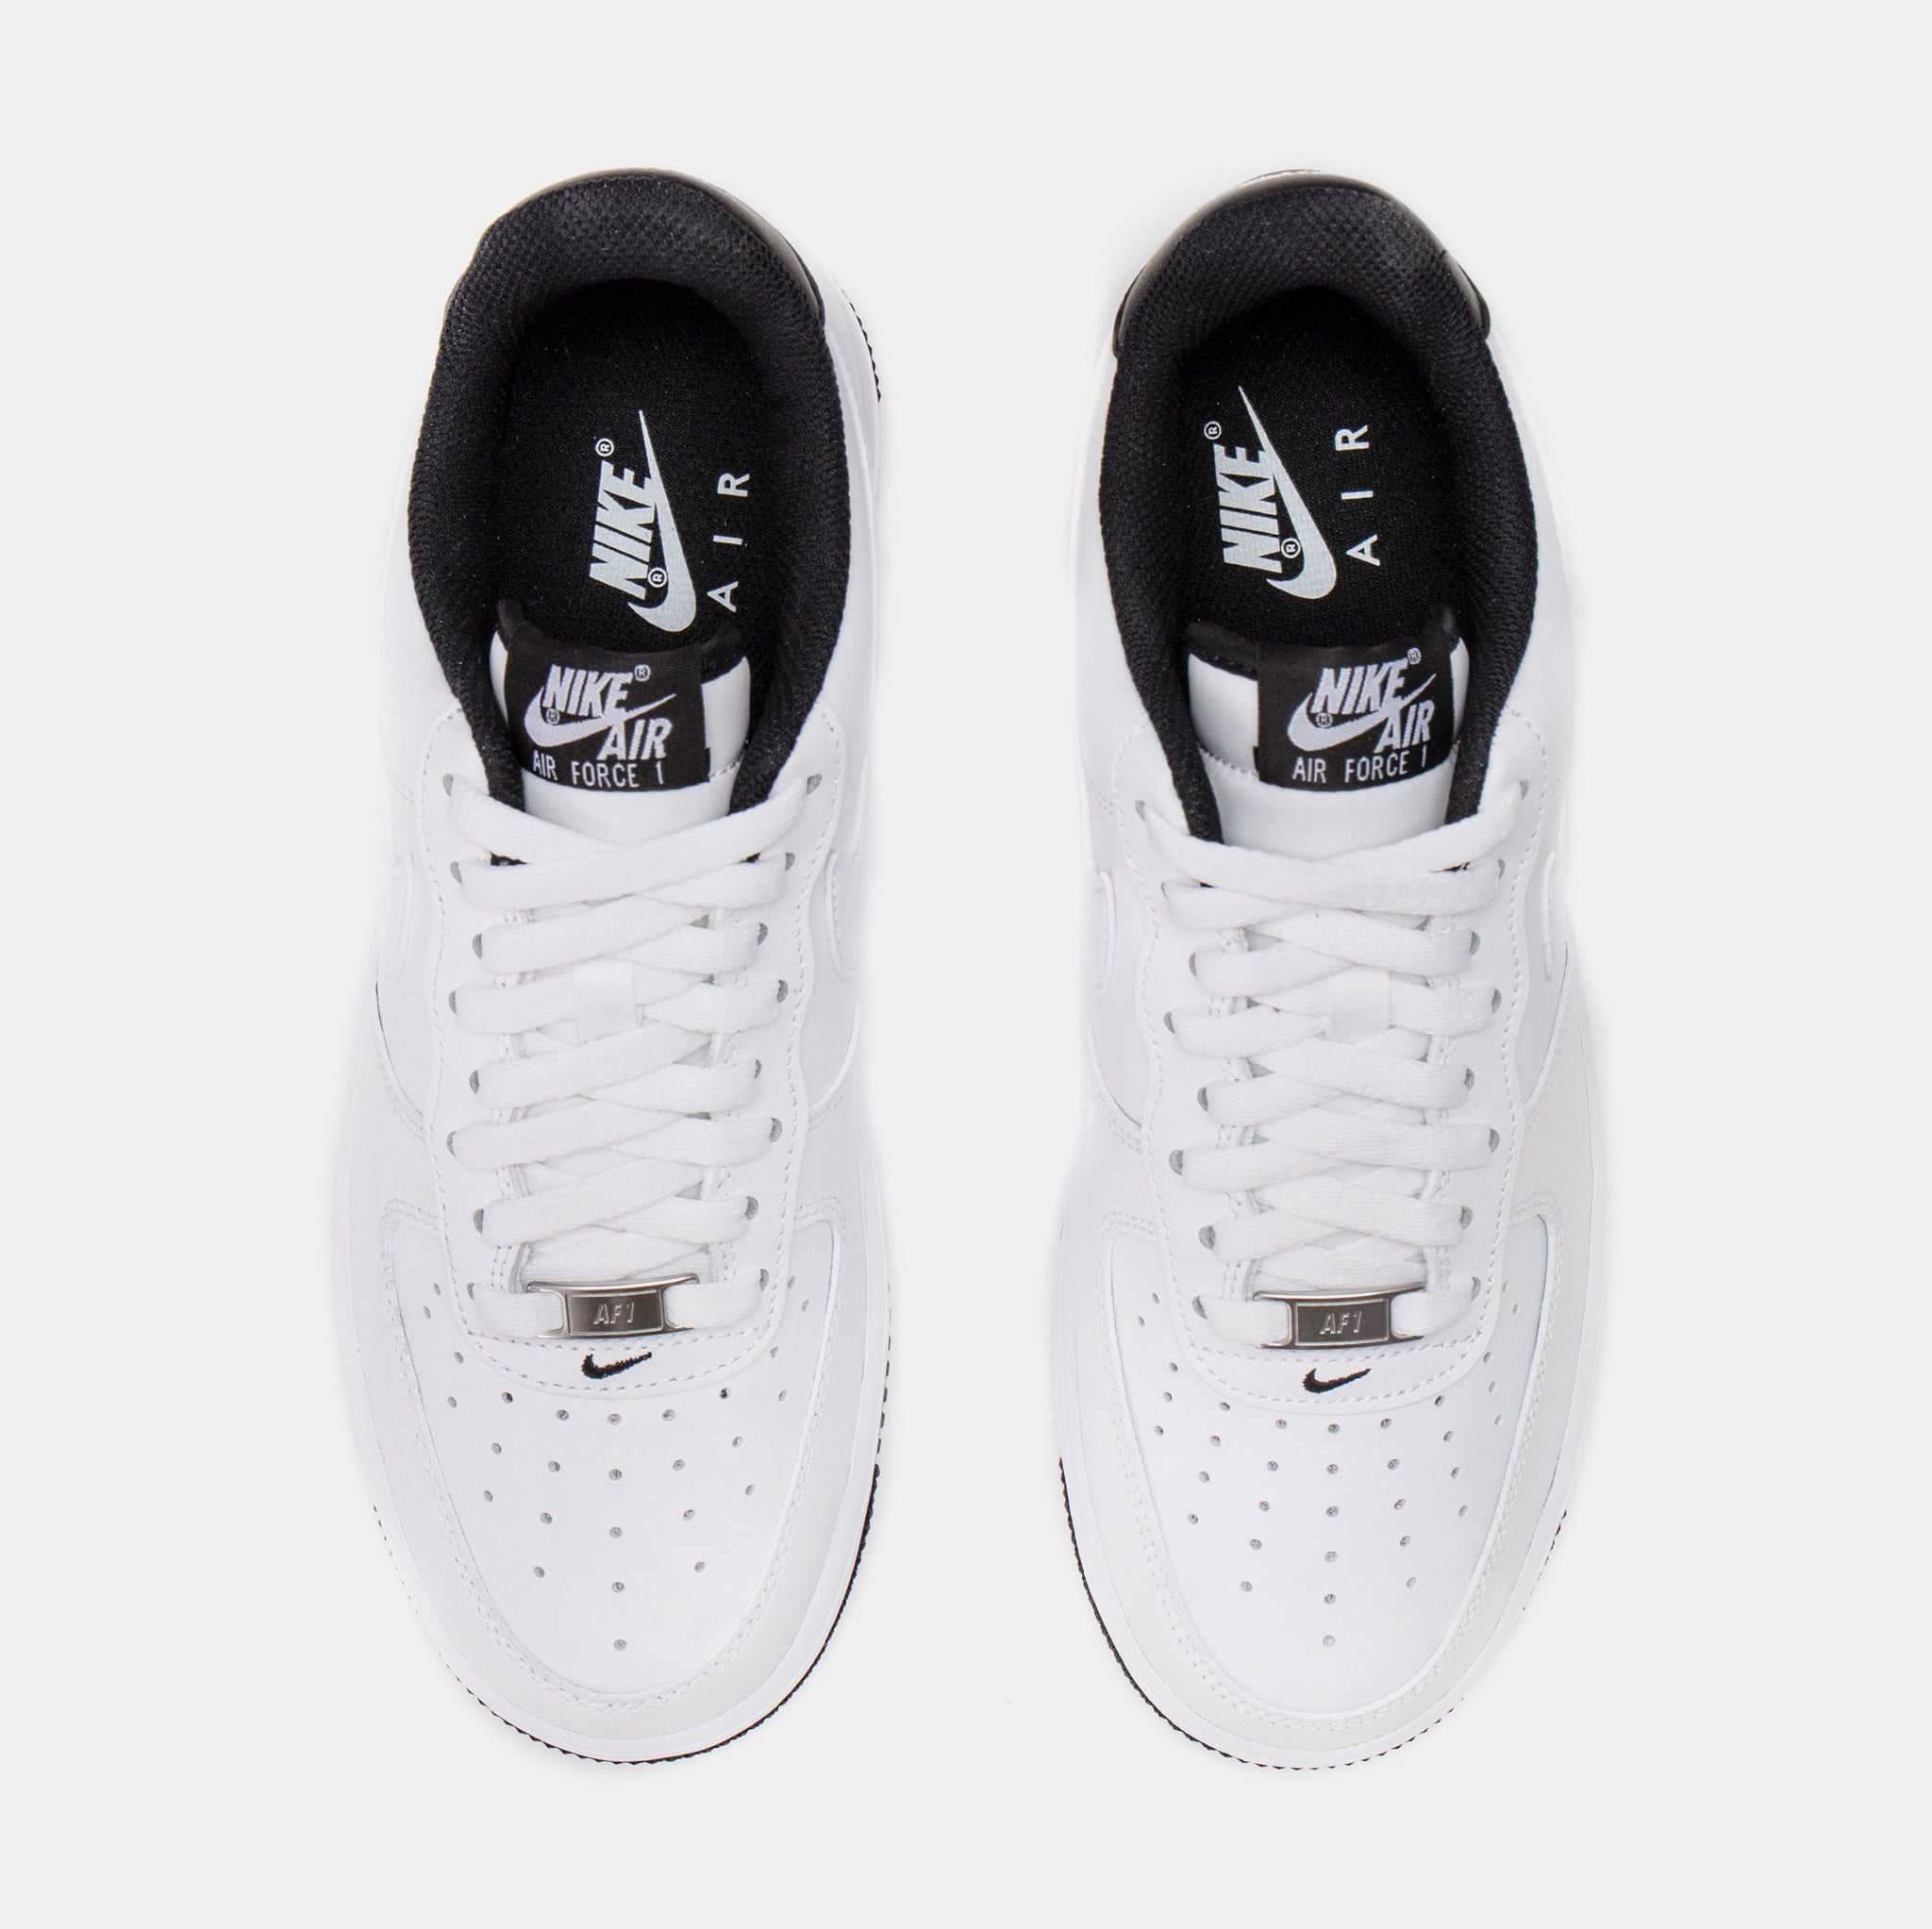 Nike Air Force 1 Low 40th Anniversary Mens Lifestyle Shoes White Black  DQ7658-100 – Shoe Palace